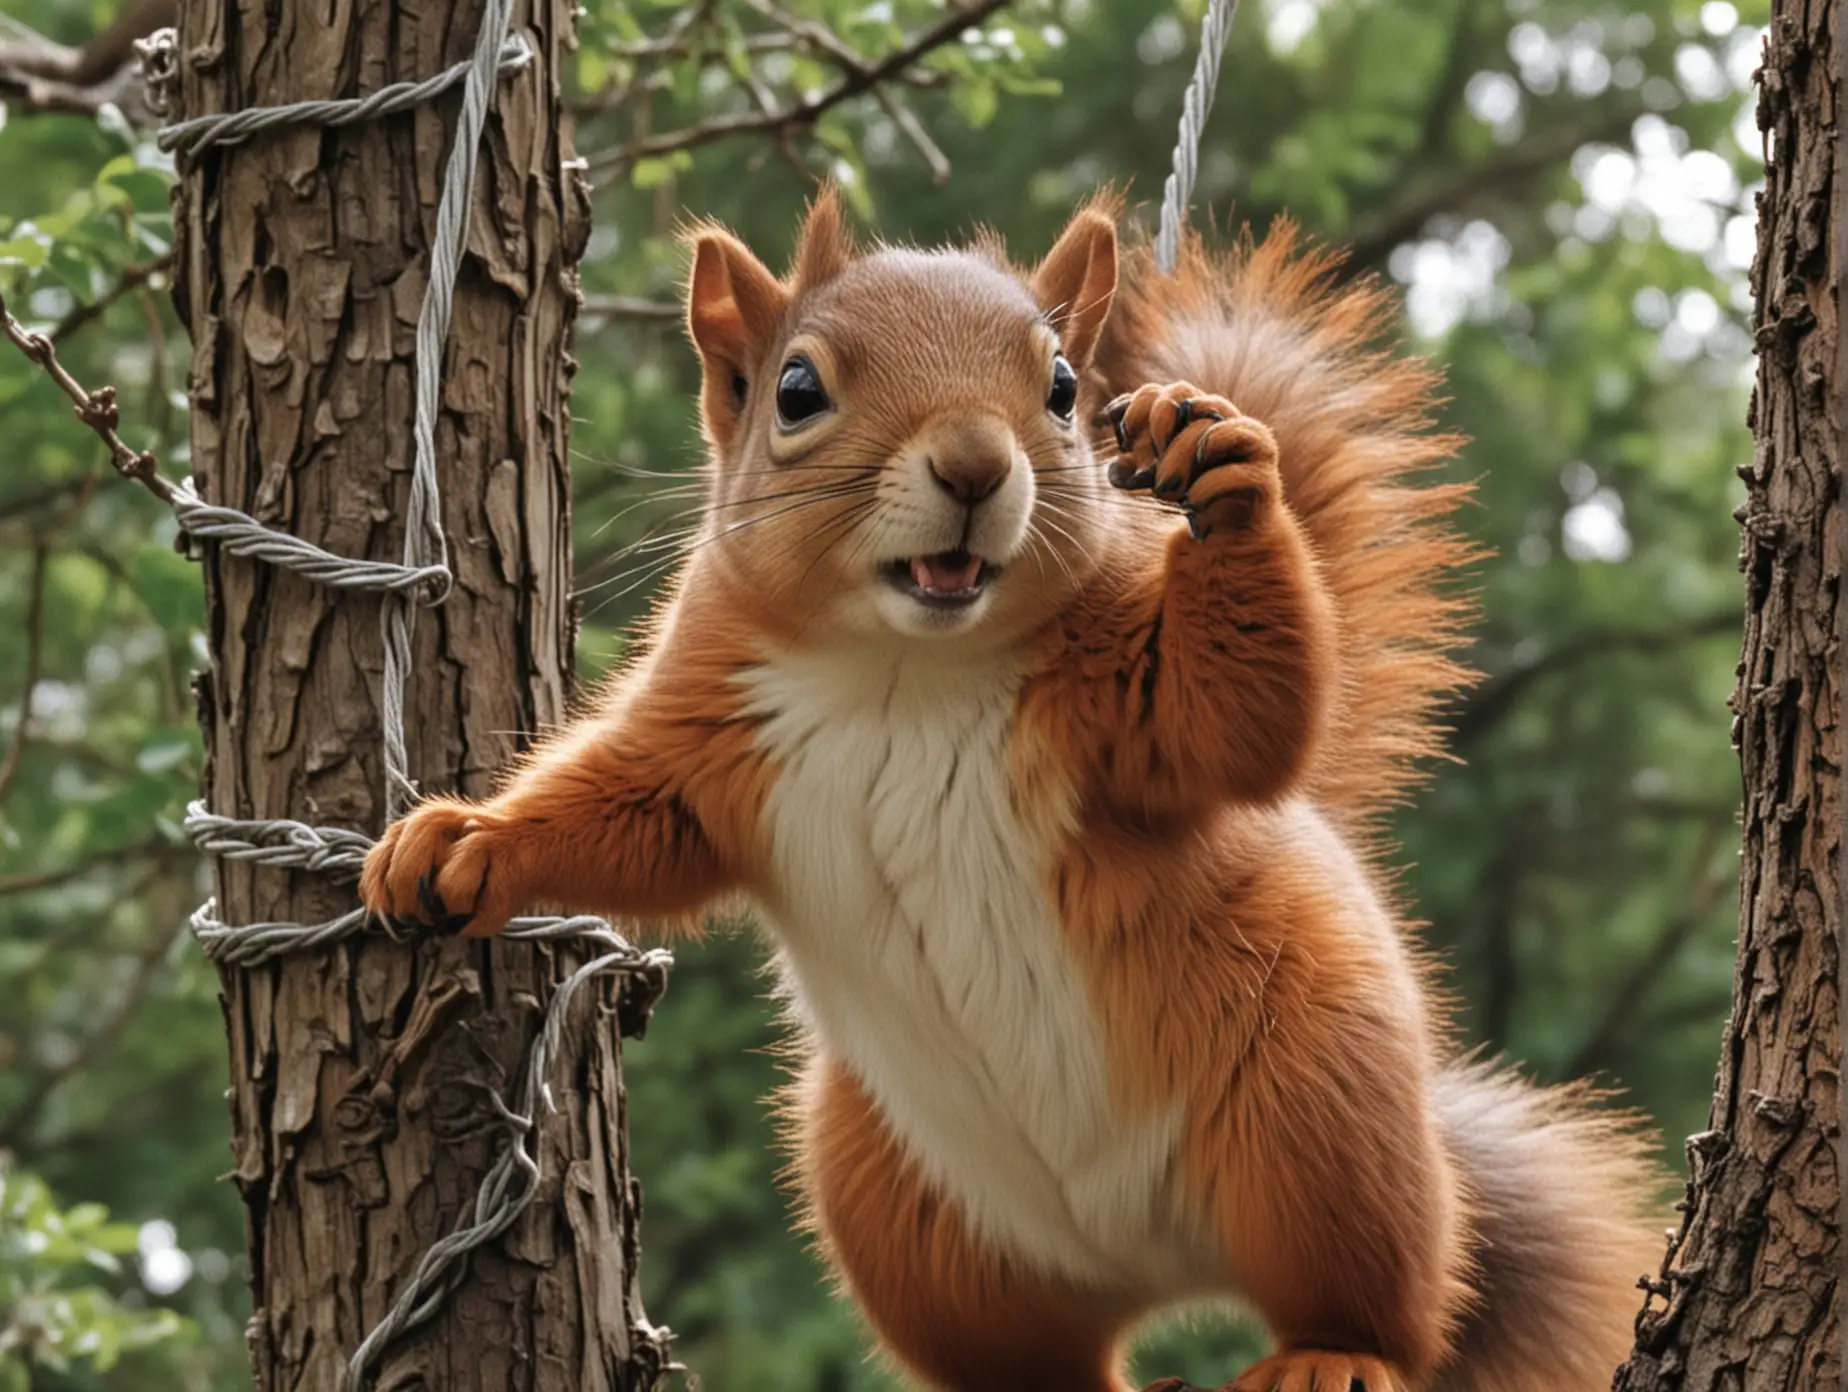 footage from a 1980s sci-fi dvd,  squirrel with human mannerisms, swinging on a vine